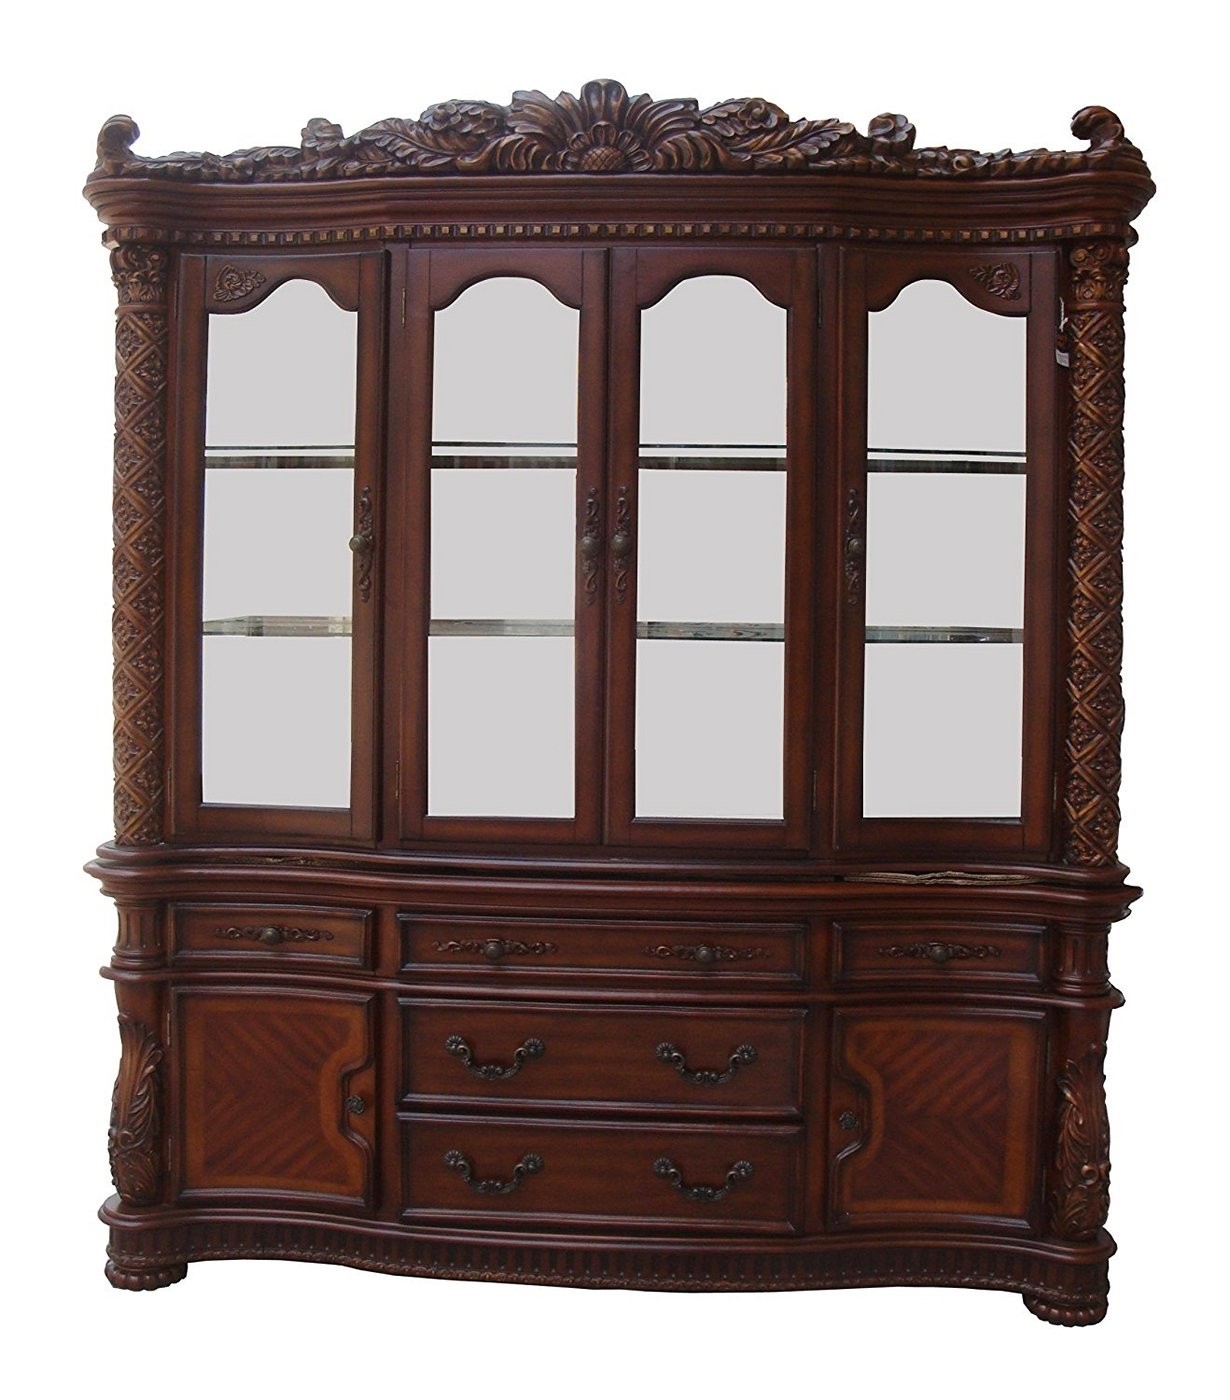 Vendome traditional carved floral china cabinet in deep